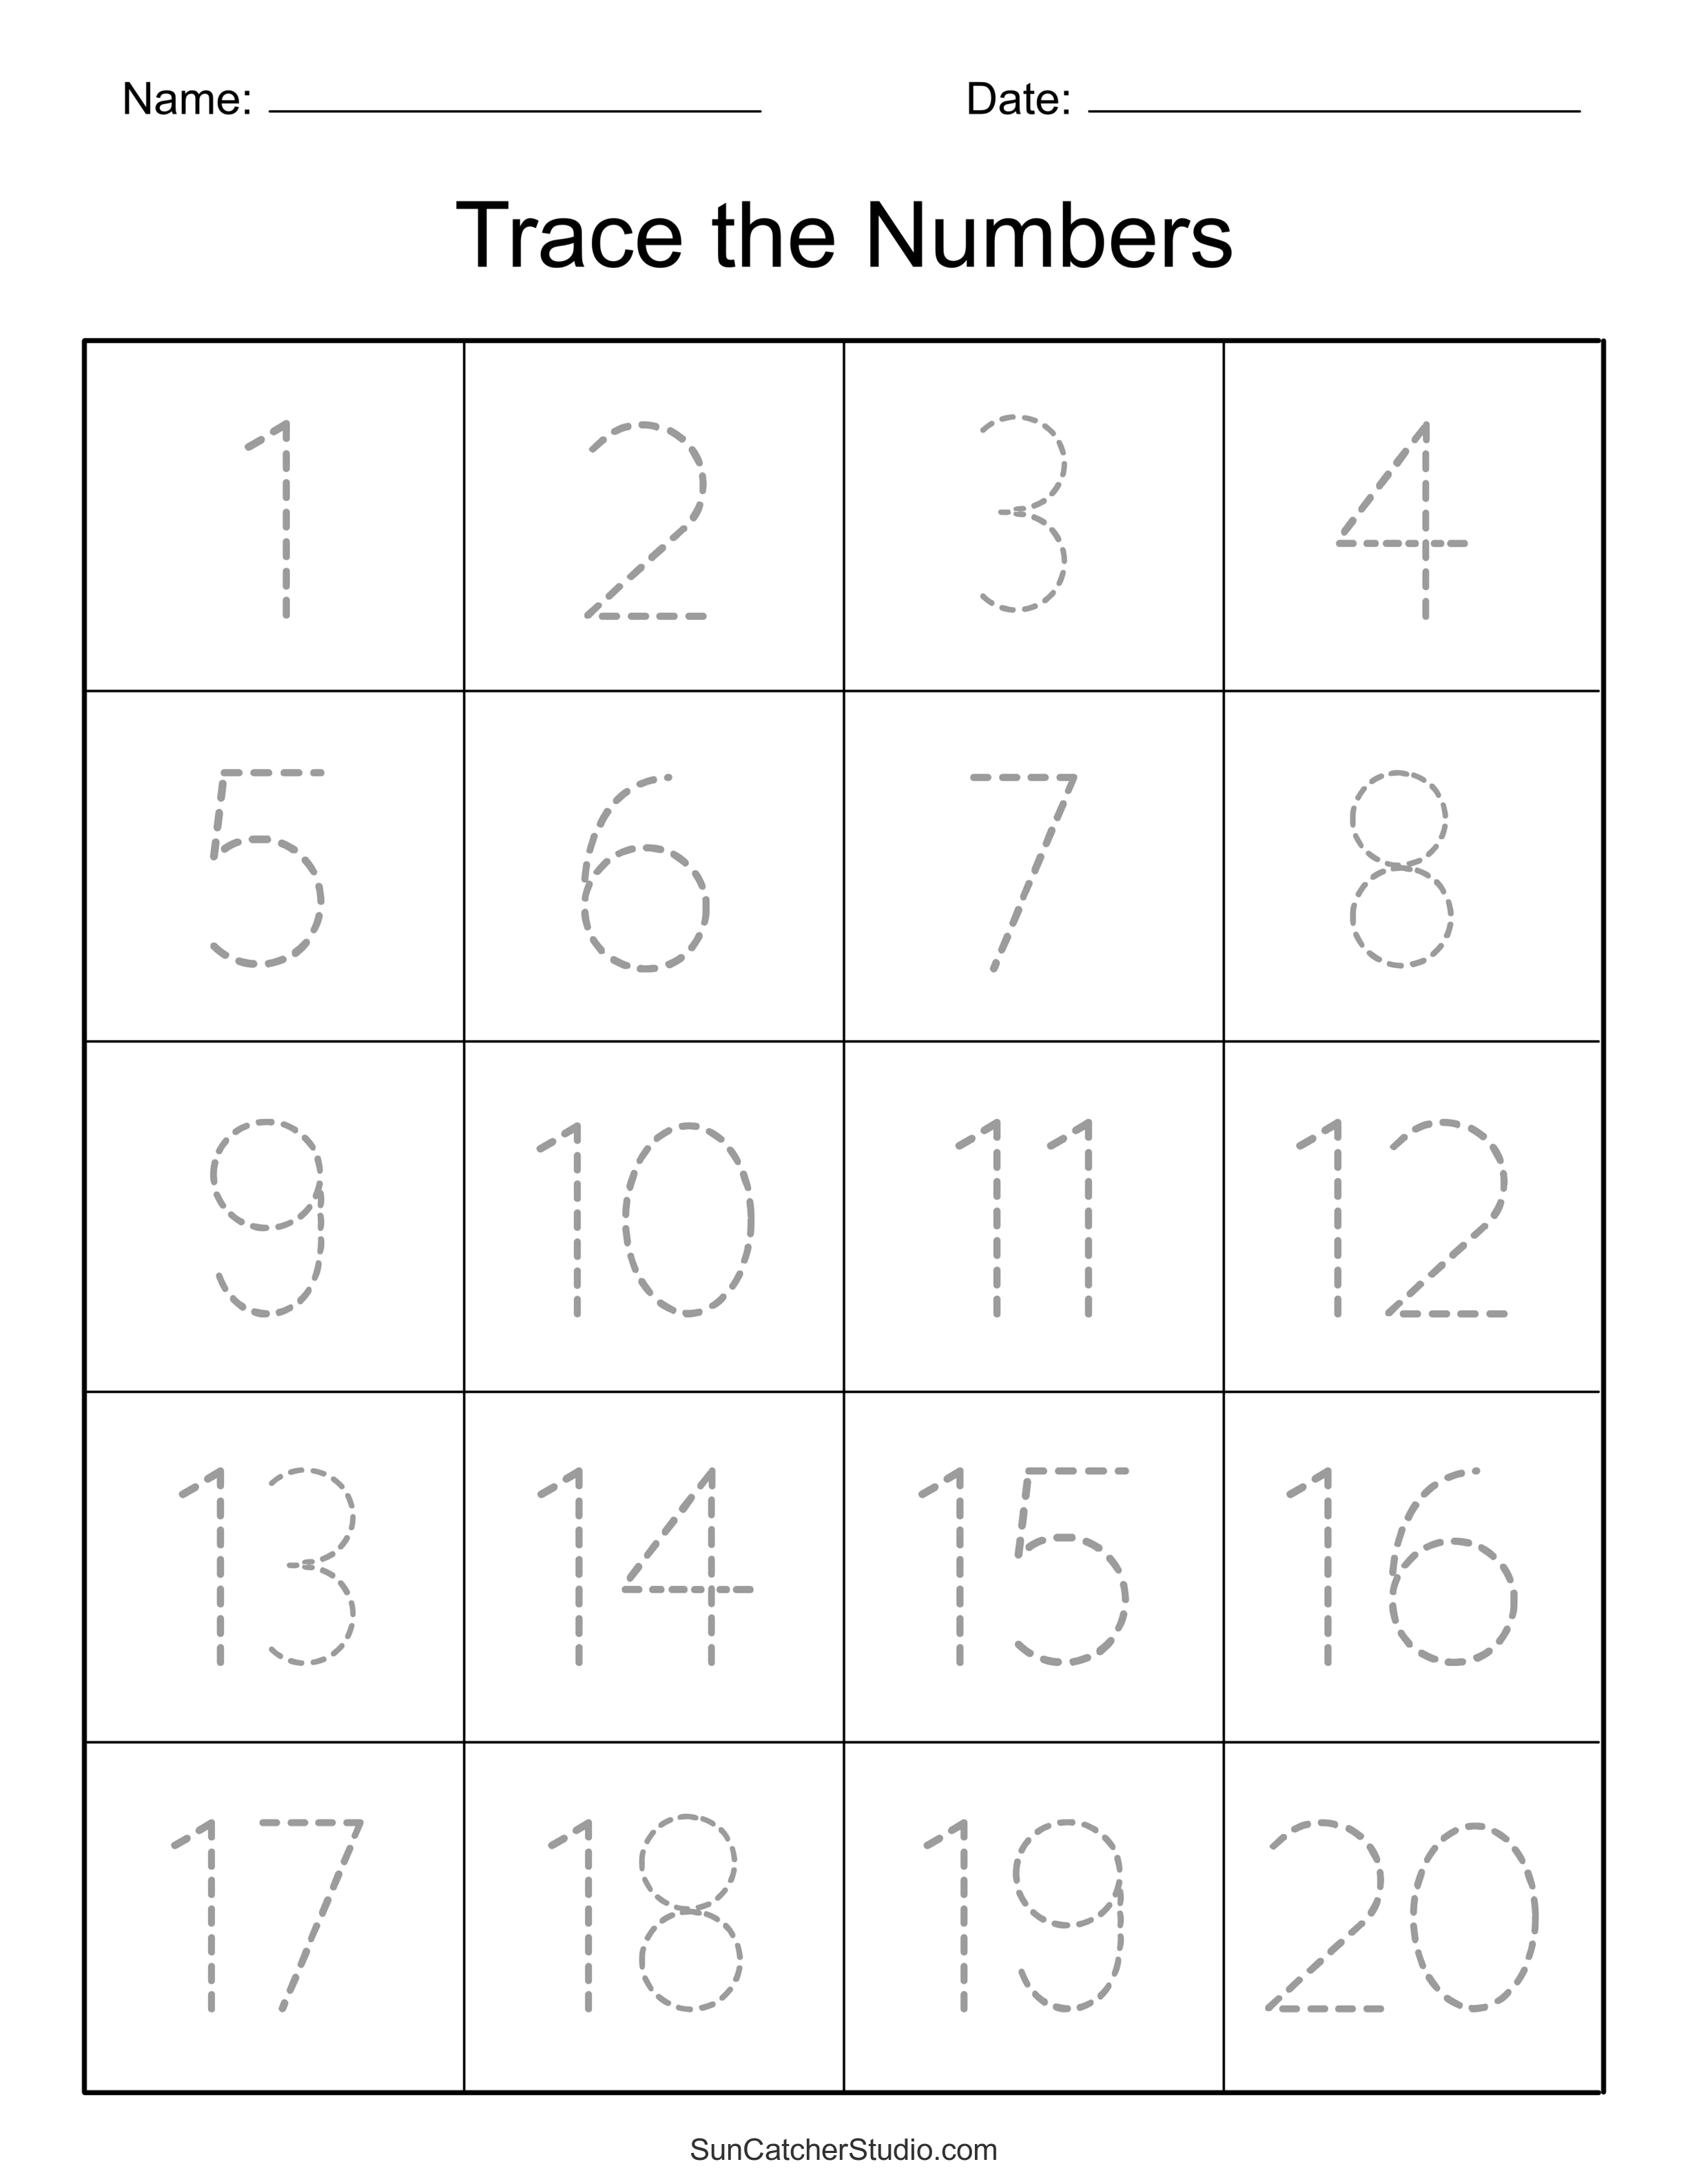 Tracing Numbers Free Printable Practice PDF Worksheets DIY Projects Patterns Monograms Designs Templates